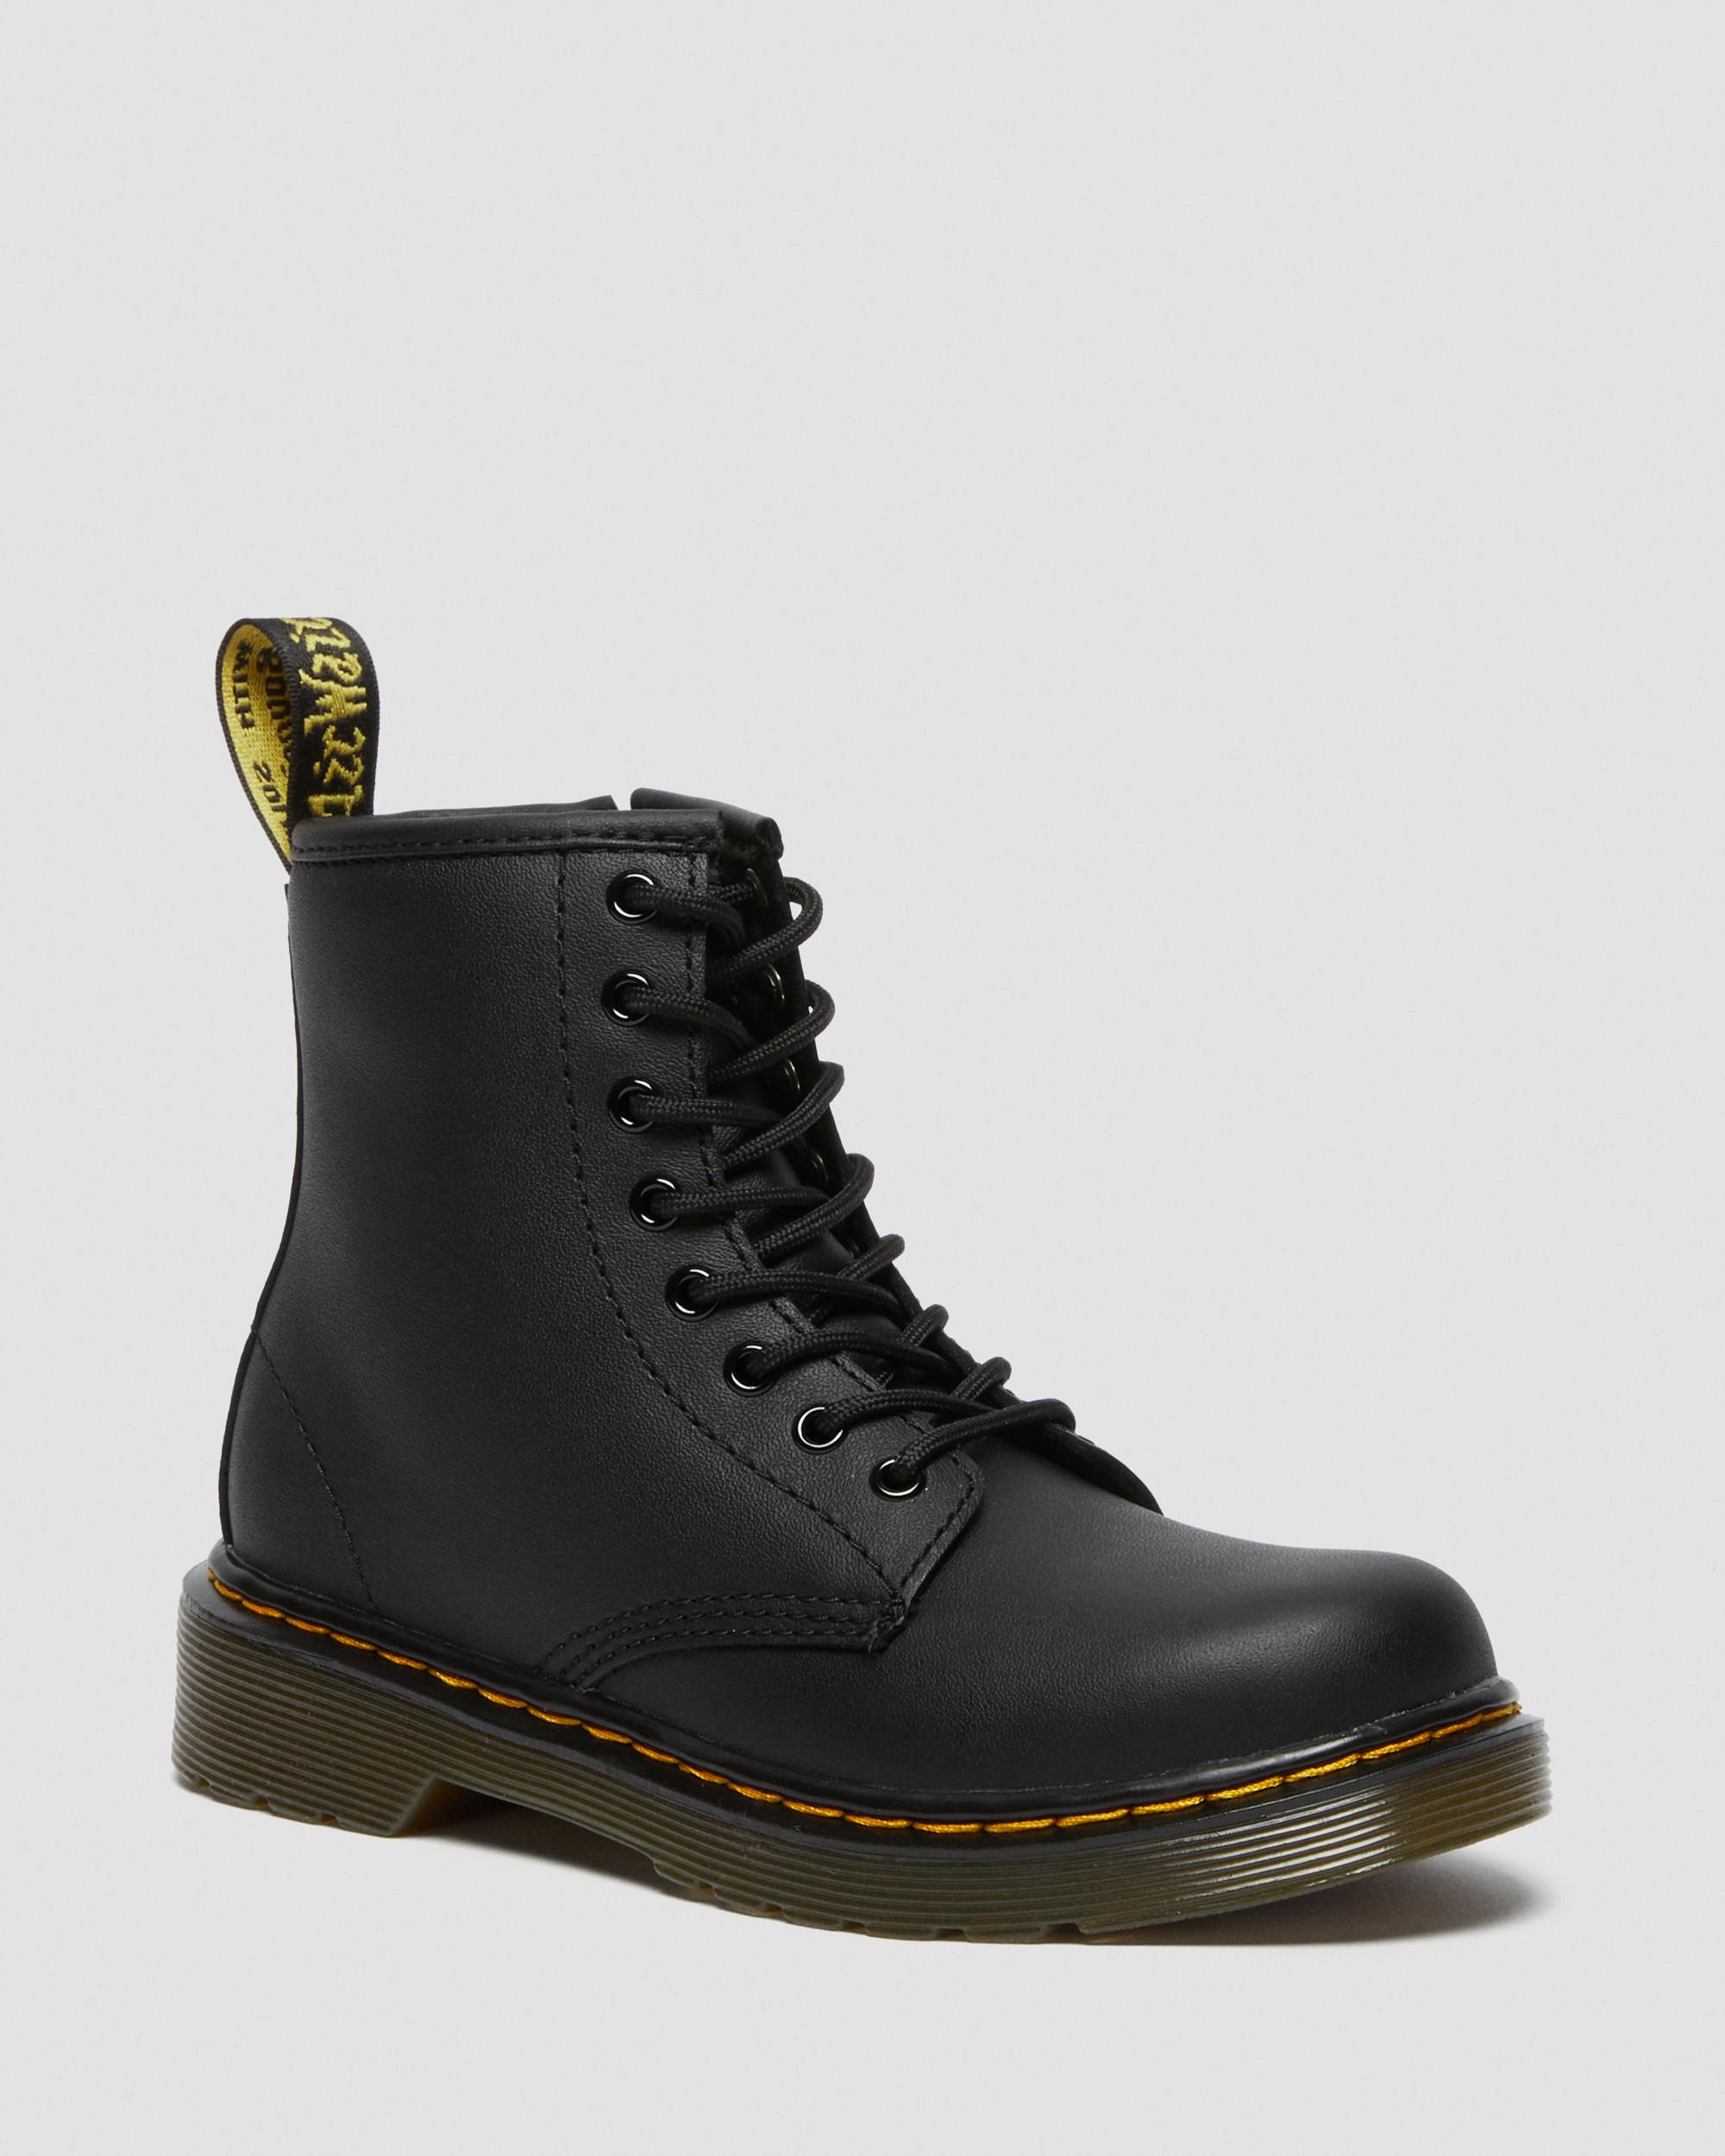 Junior 1460 Softy T Leather Dr. Lace | Boots Martens Black Up in